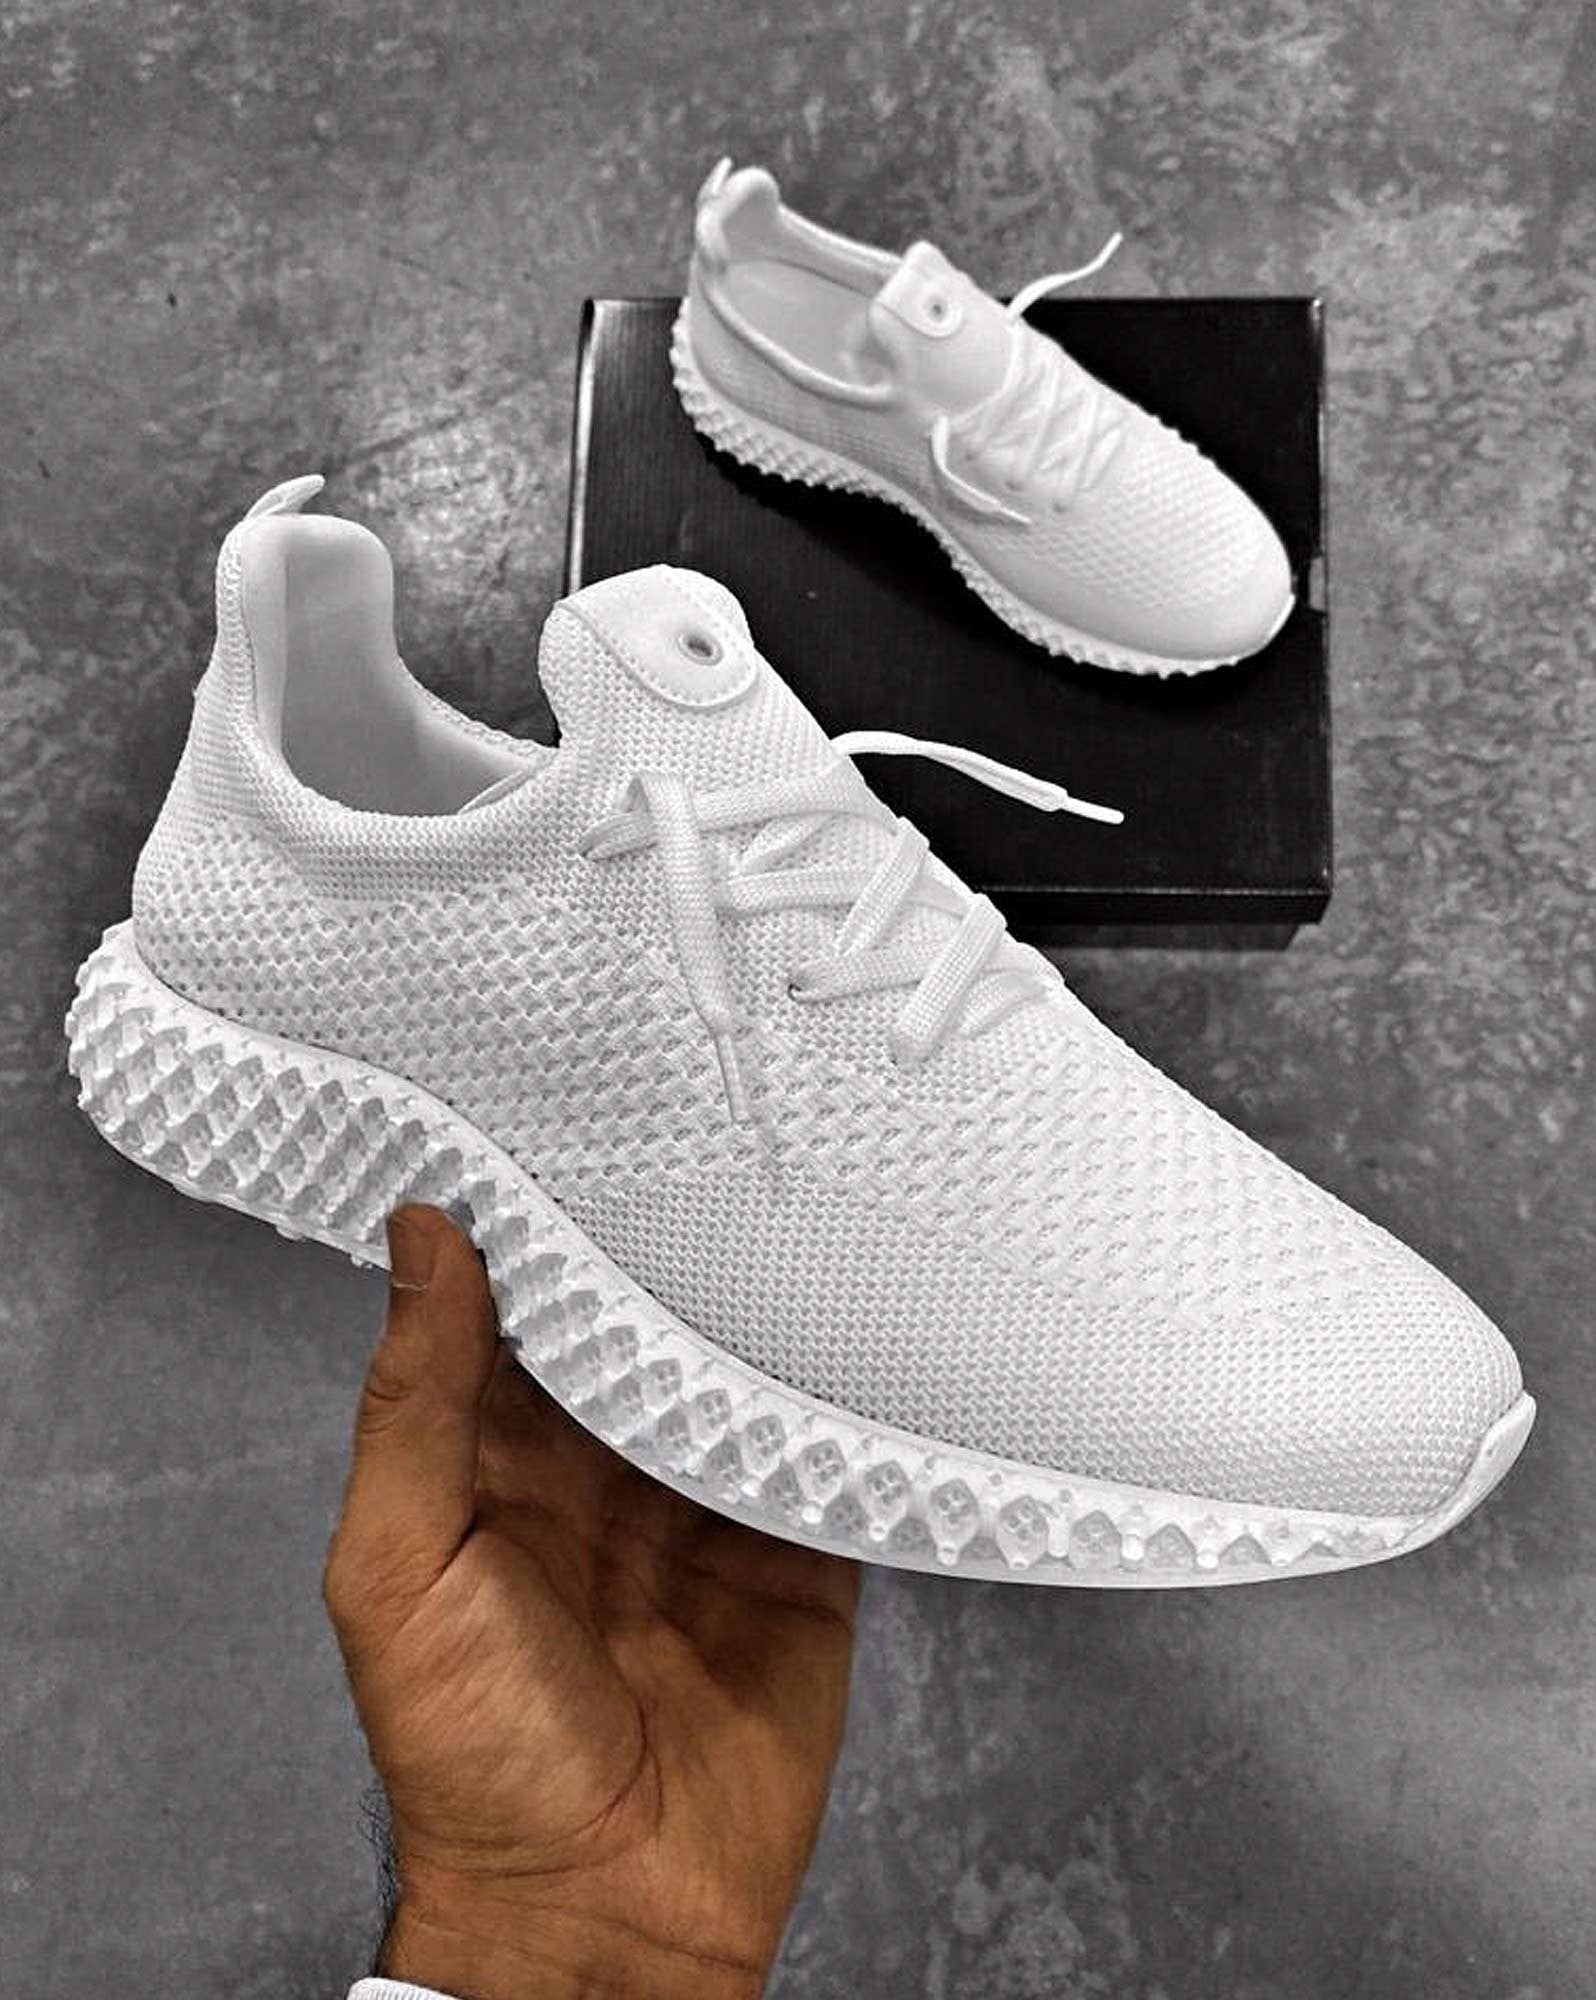 White knit light sneakers with 3d honeycomb sole